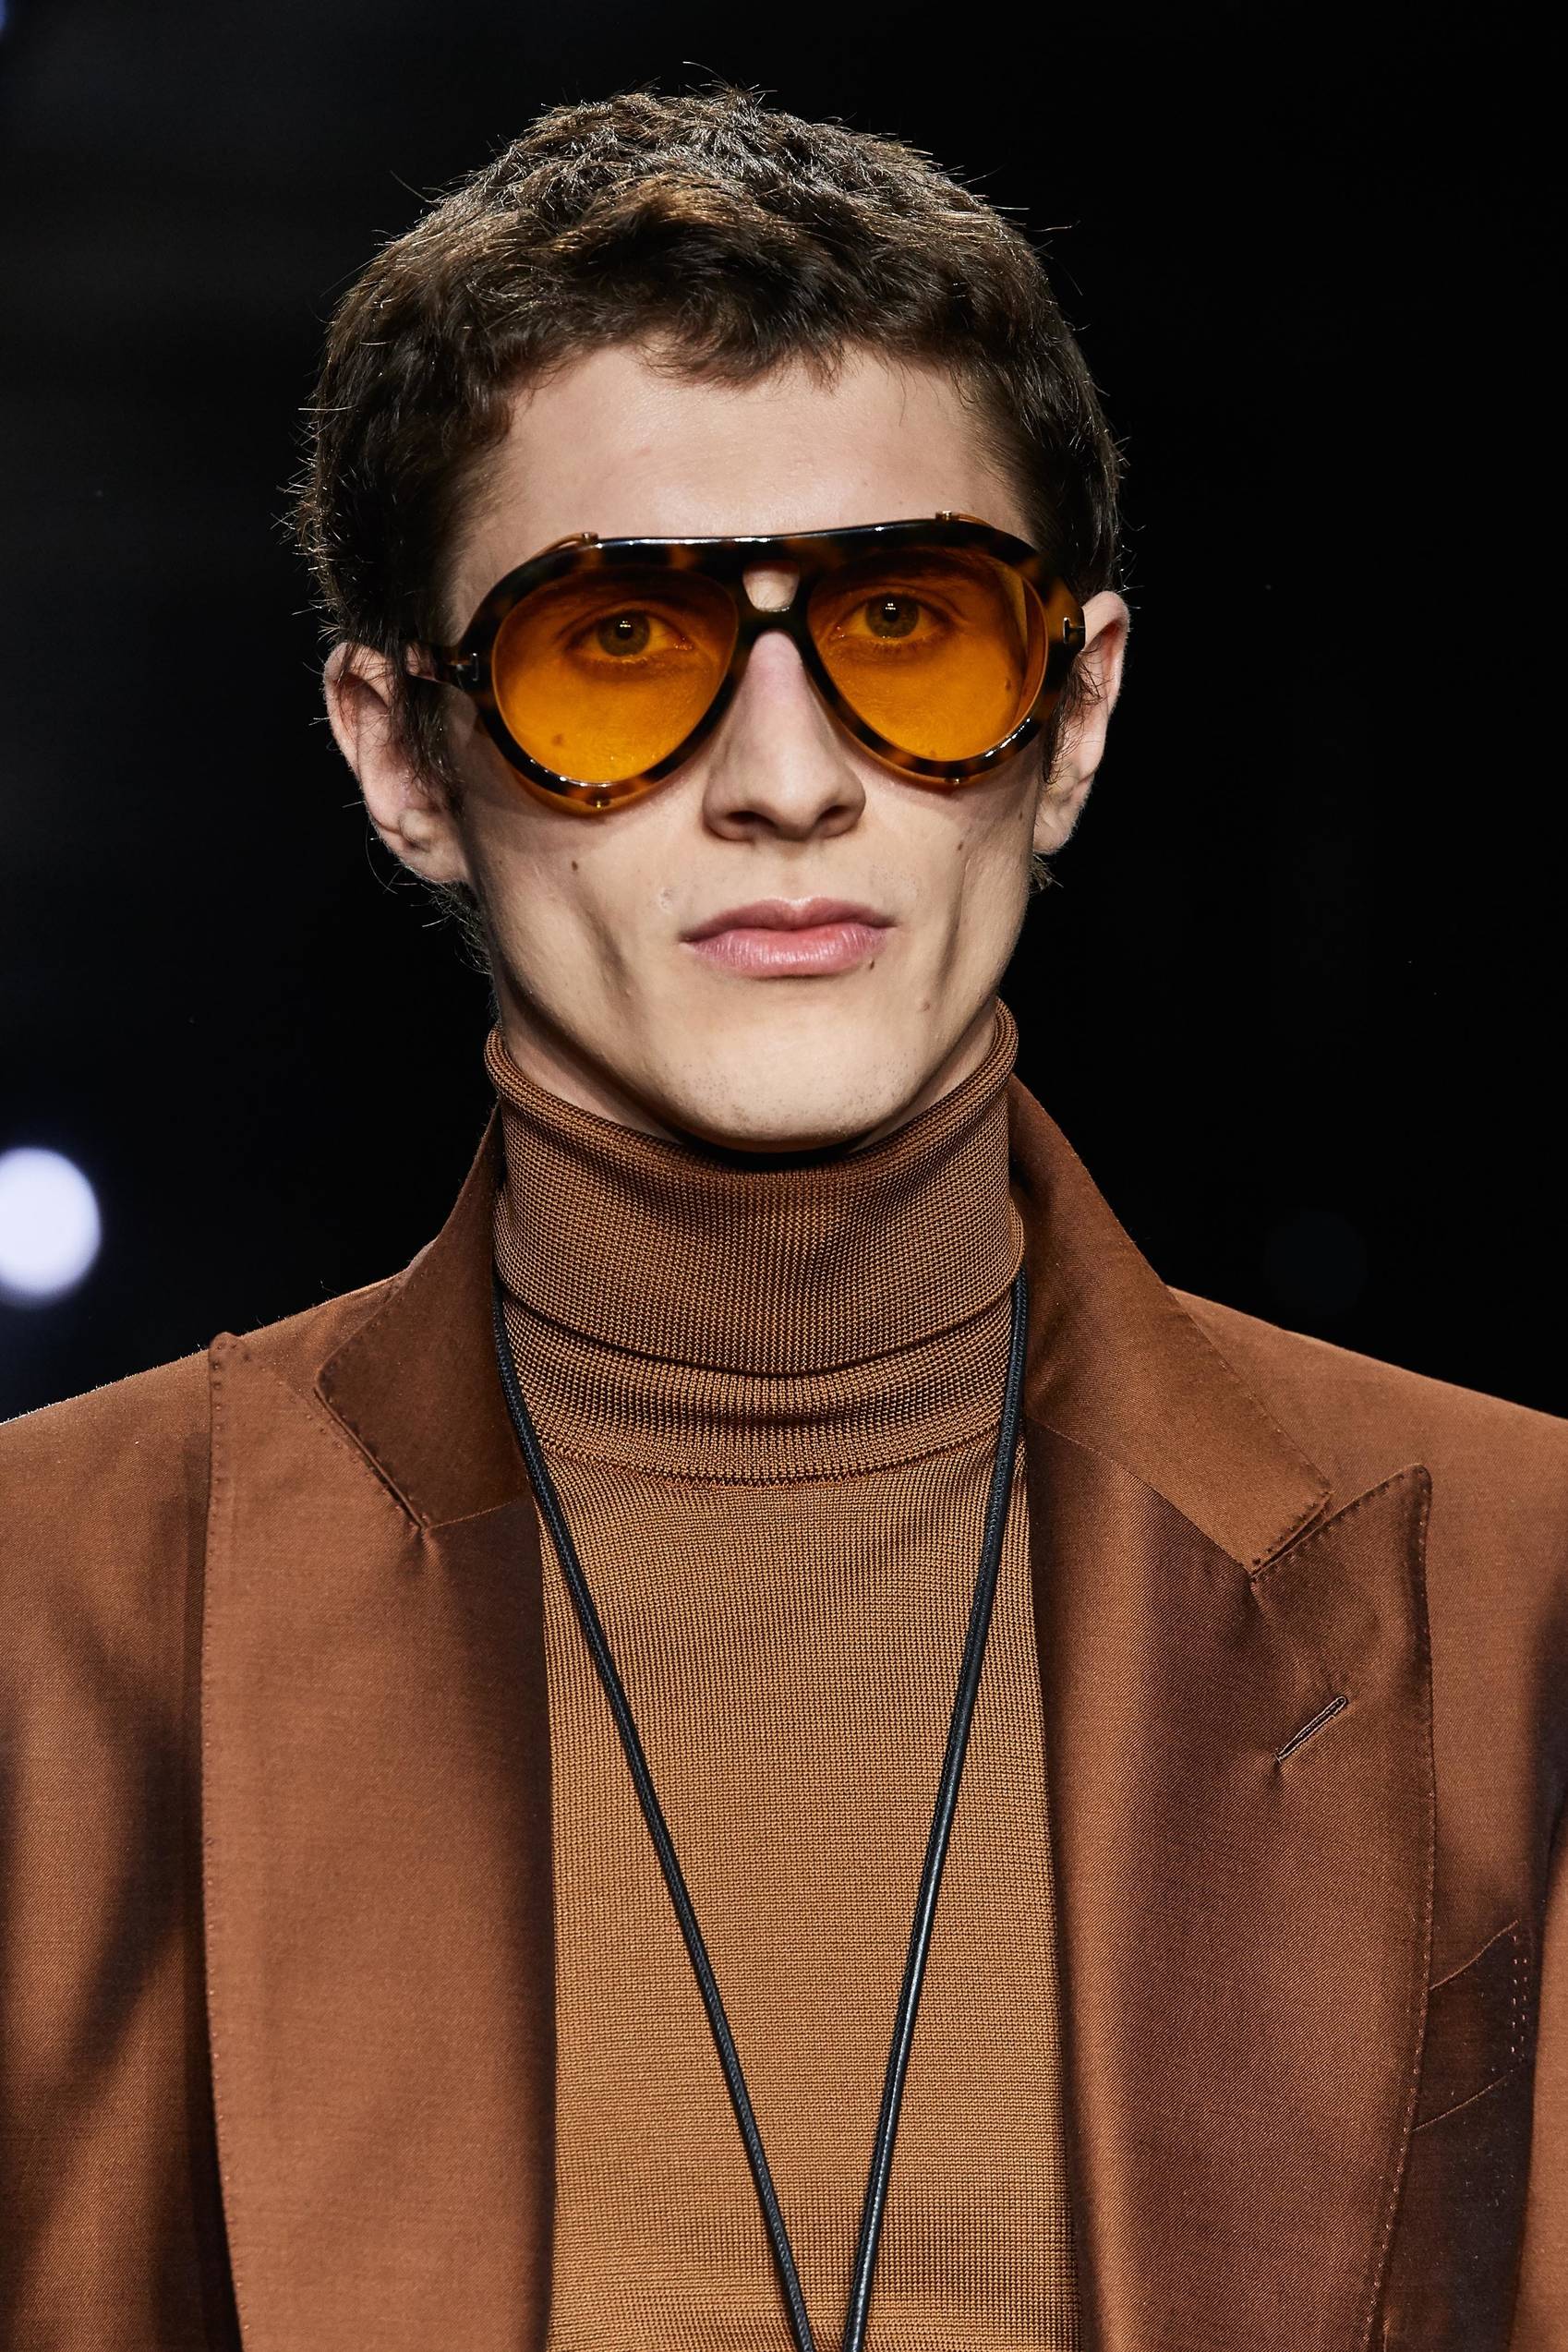 TOM FORD - FALL 2020 READY-TO-WEAR